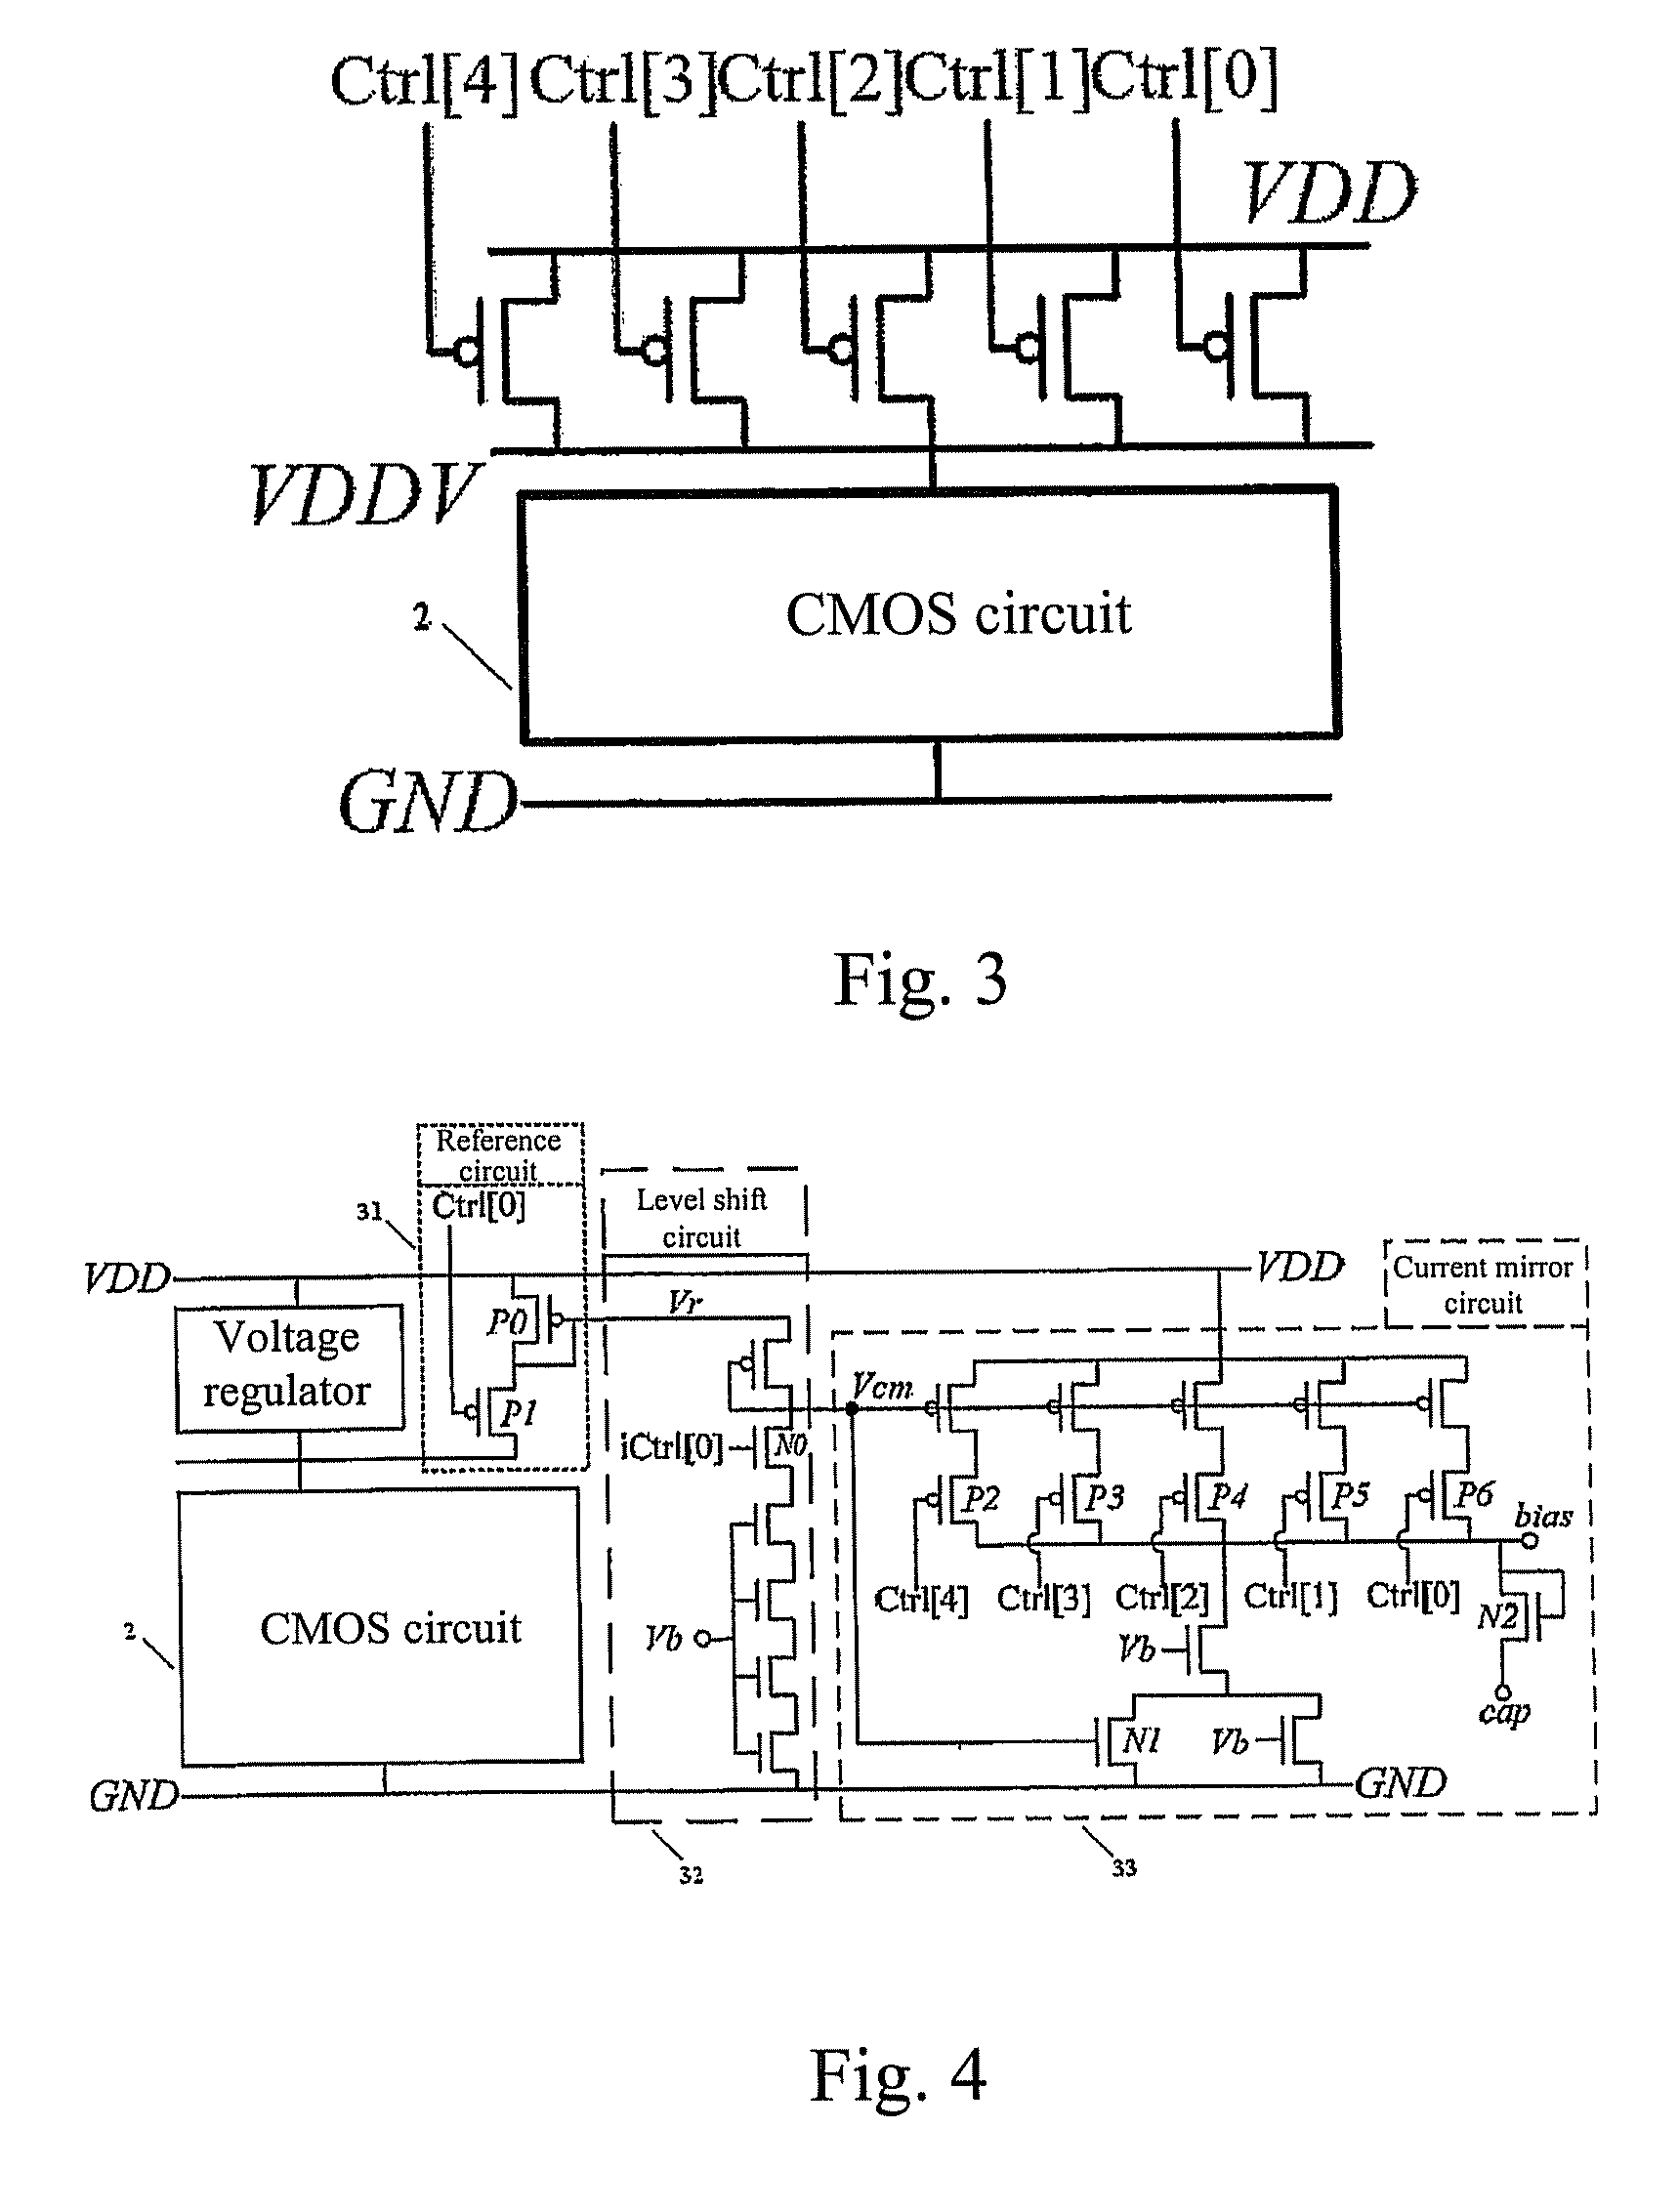 Self-aware adaptive power control system and a method for determining the circuit state